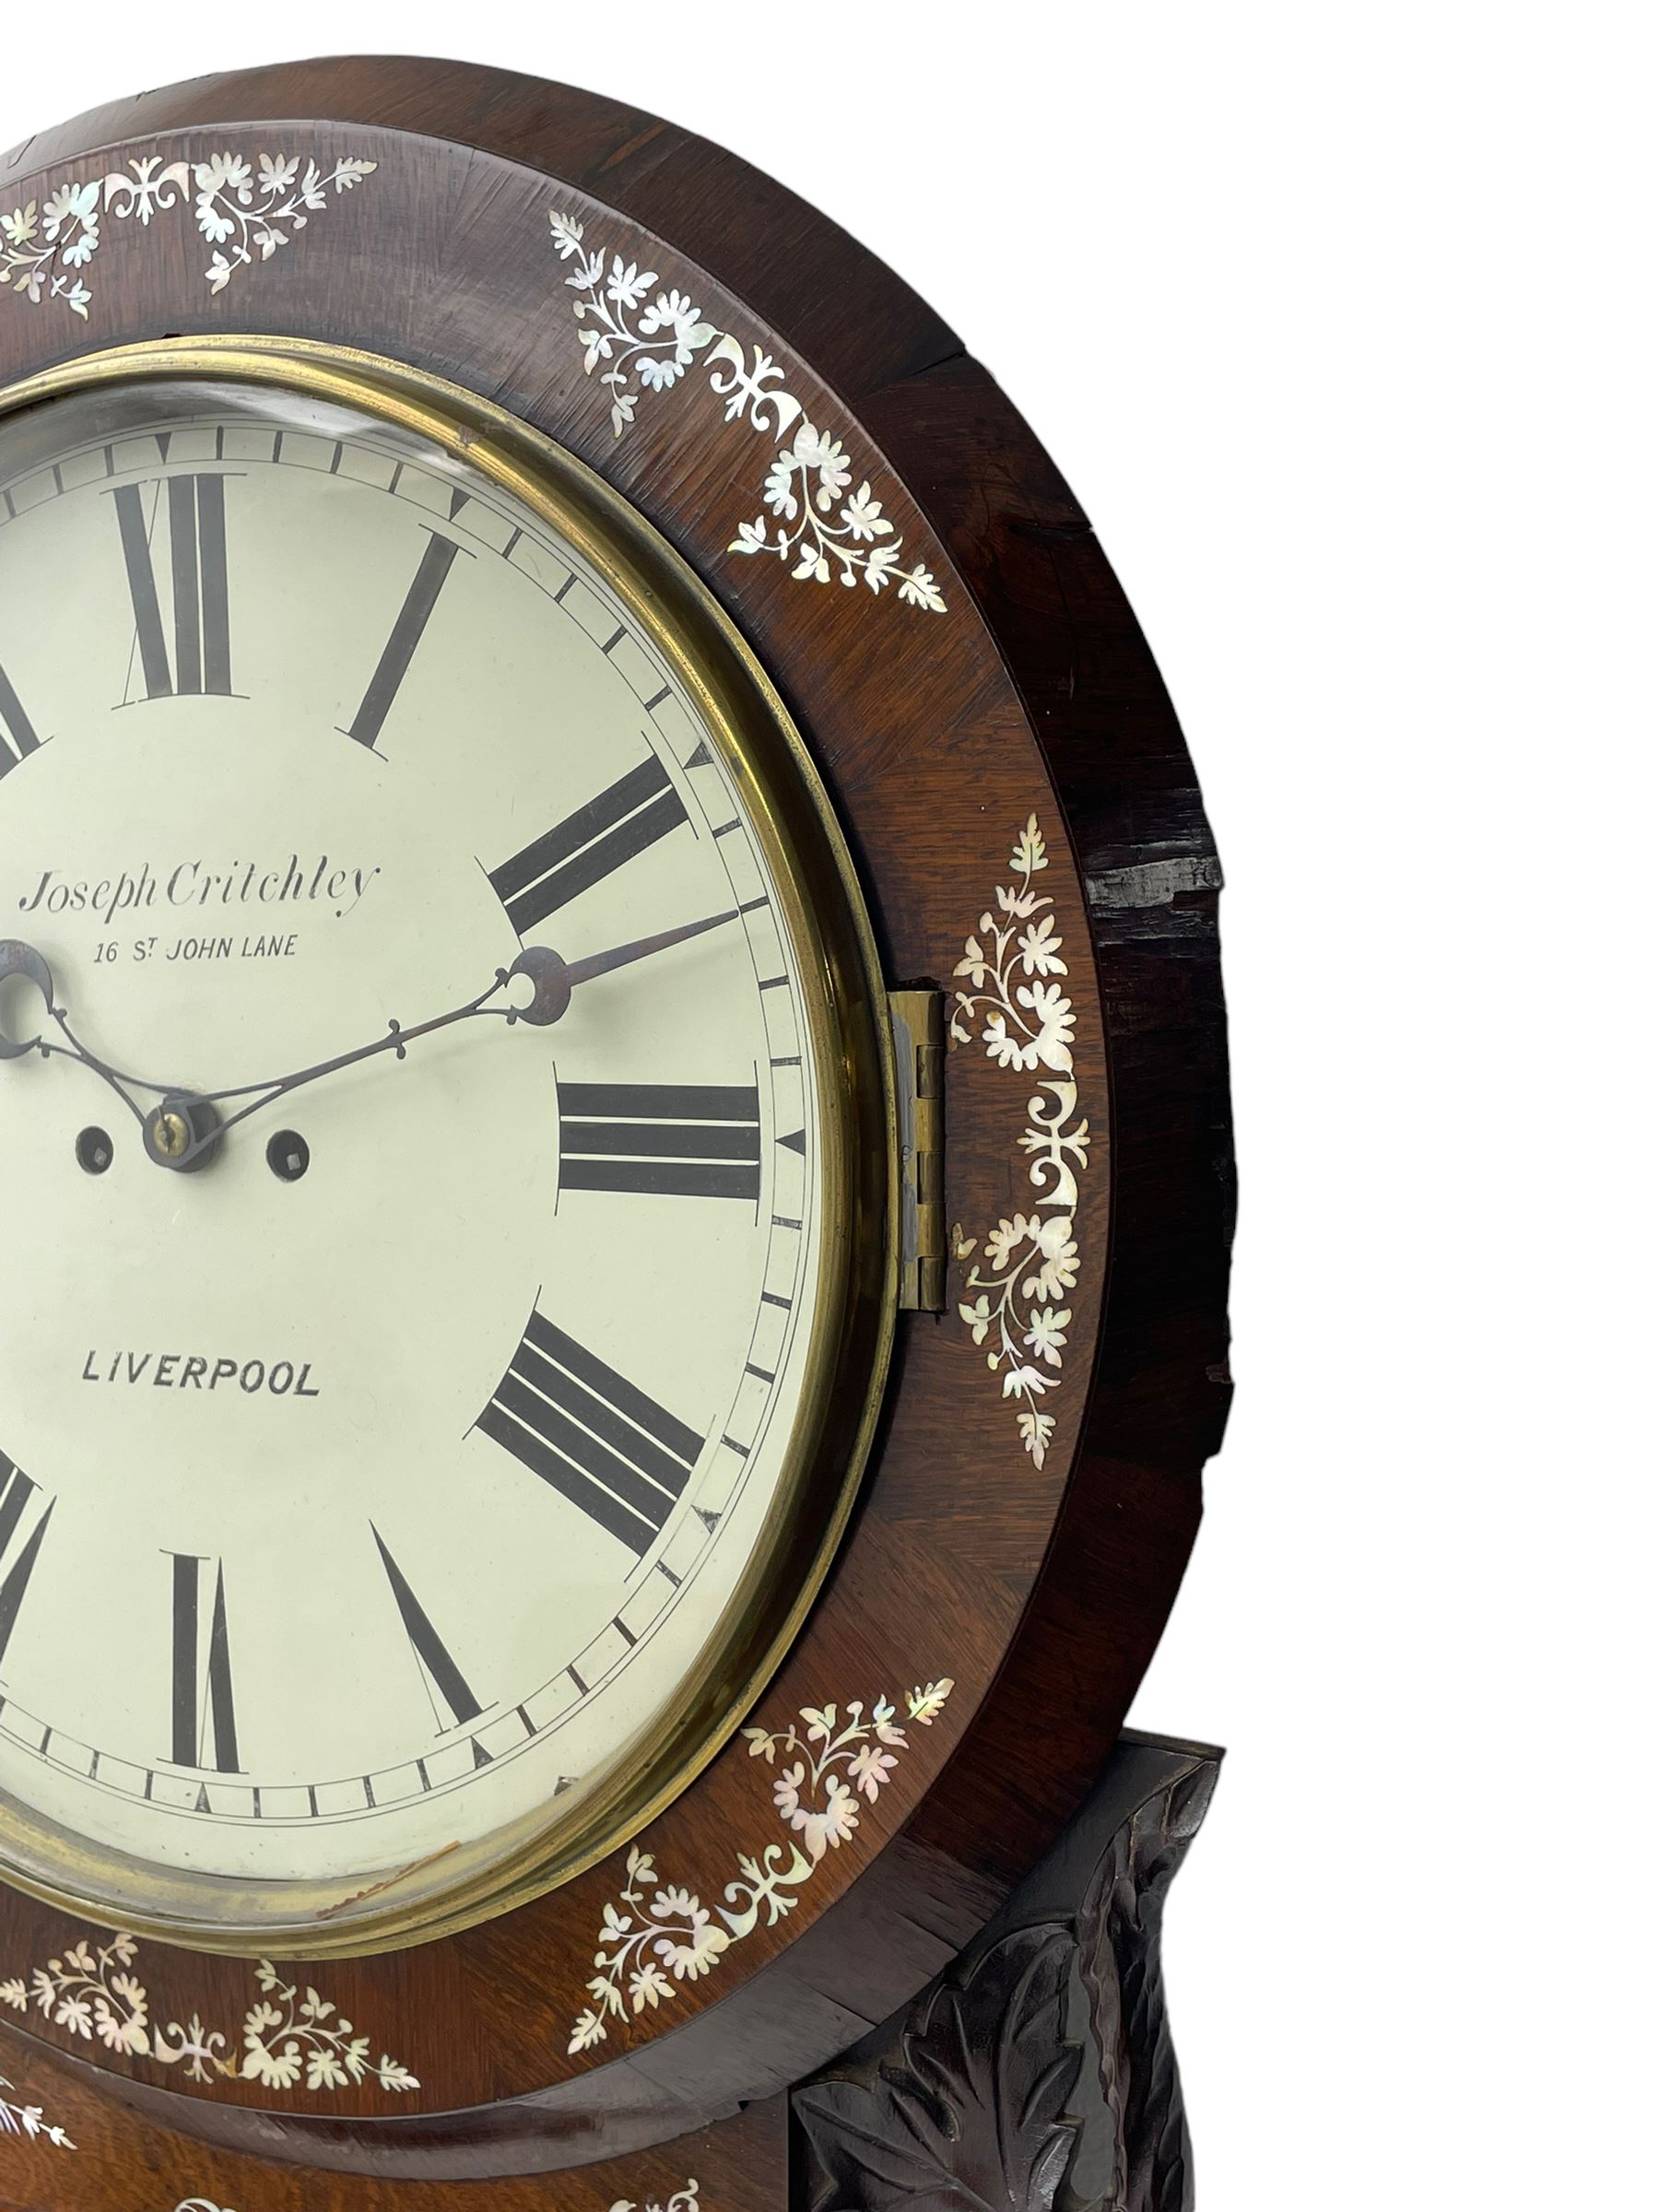 Joseph Critchley of Liverpool - early 19th century twin fusee 8-day rosewood and mother of pearl in - Image 2 of 17